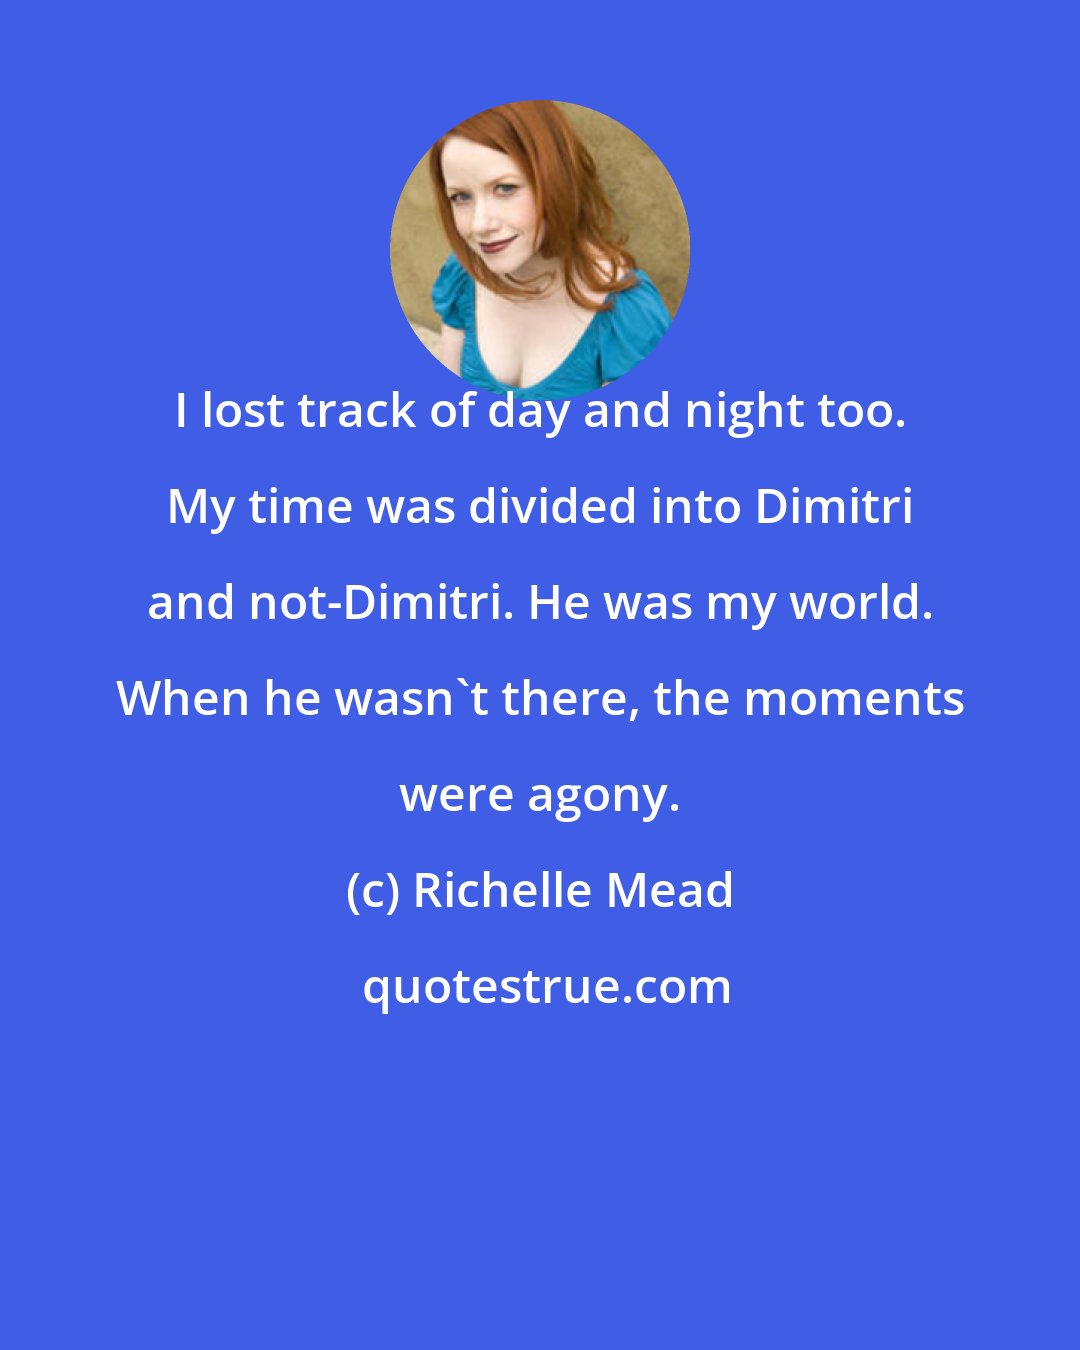 Richelle Mead: I lost track of day and night too. My time was divided into Dimitri and not-Dimitri. He was my world. When he wasn't there, the moments were agony.